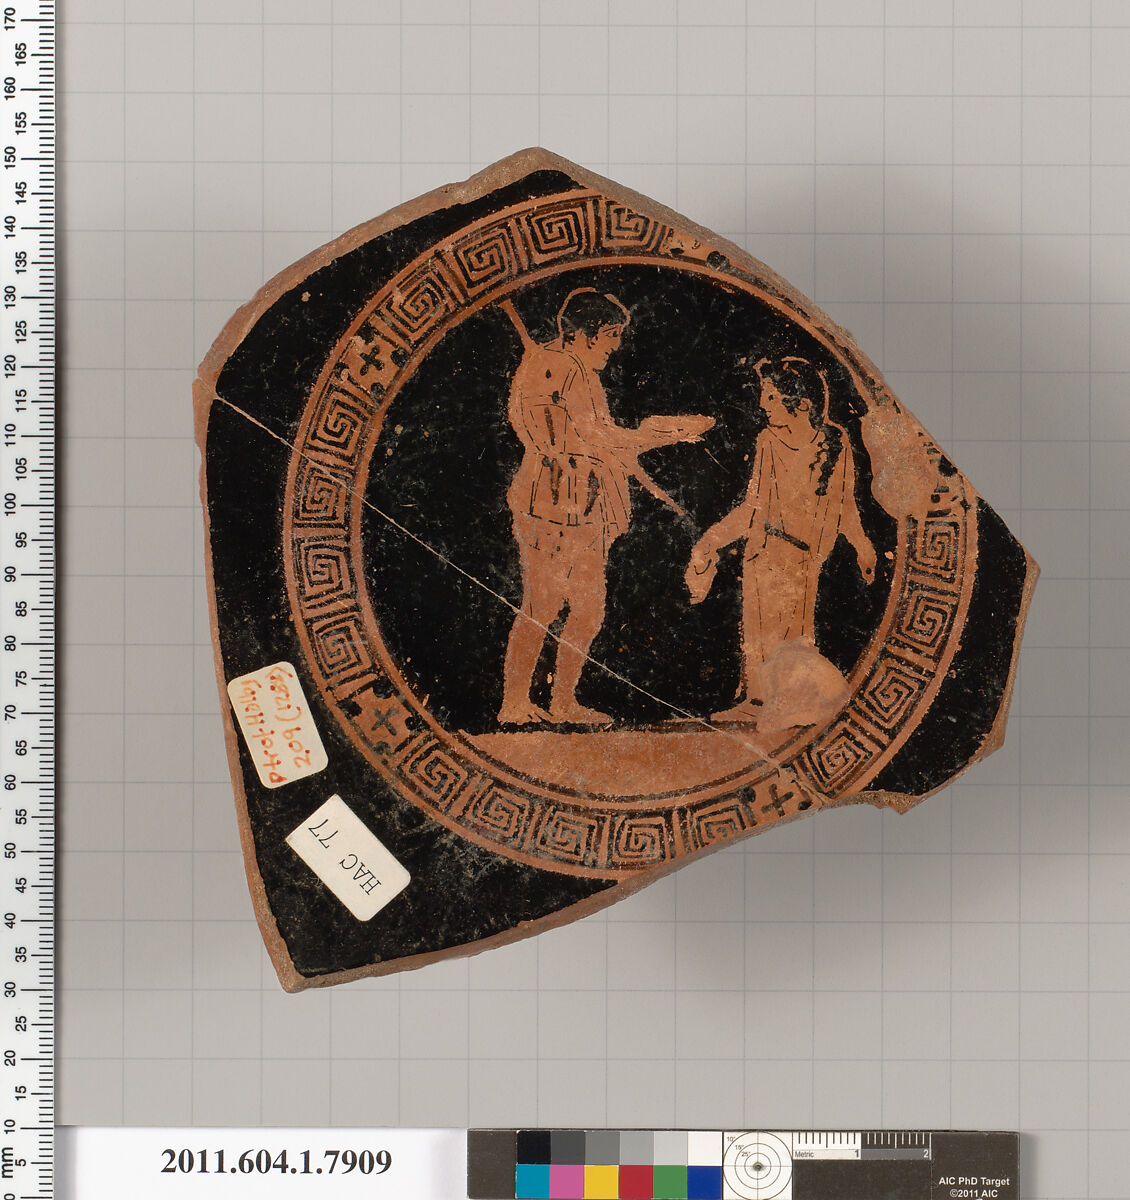 Terracotta fragment of a kylix (drinking cup), Attributed to the Painter of Heidelberg 209 [DvB], Terracotta, Greek, Attic 